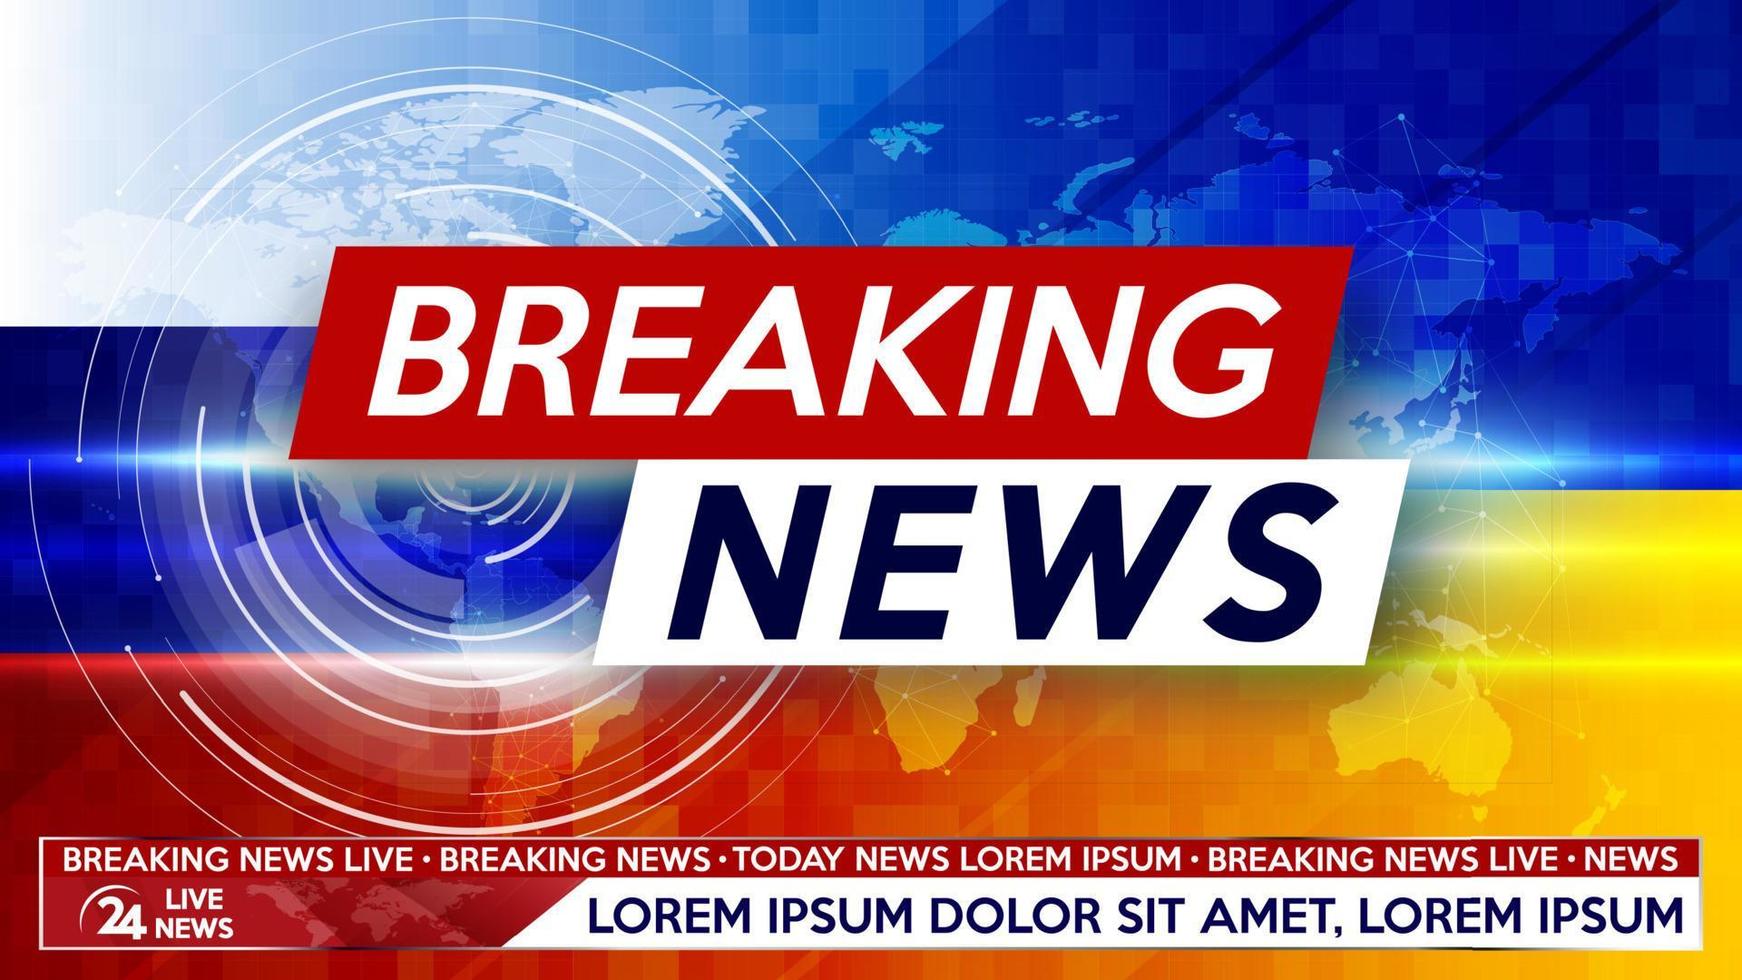 Breaking news live on world map background with Russia and Ukraine flag. Background screen saver on breaking news. vector